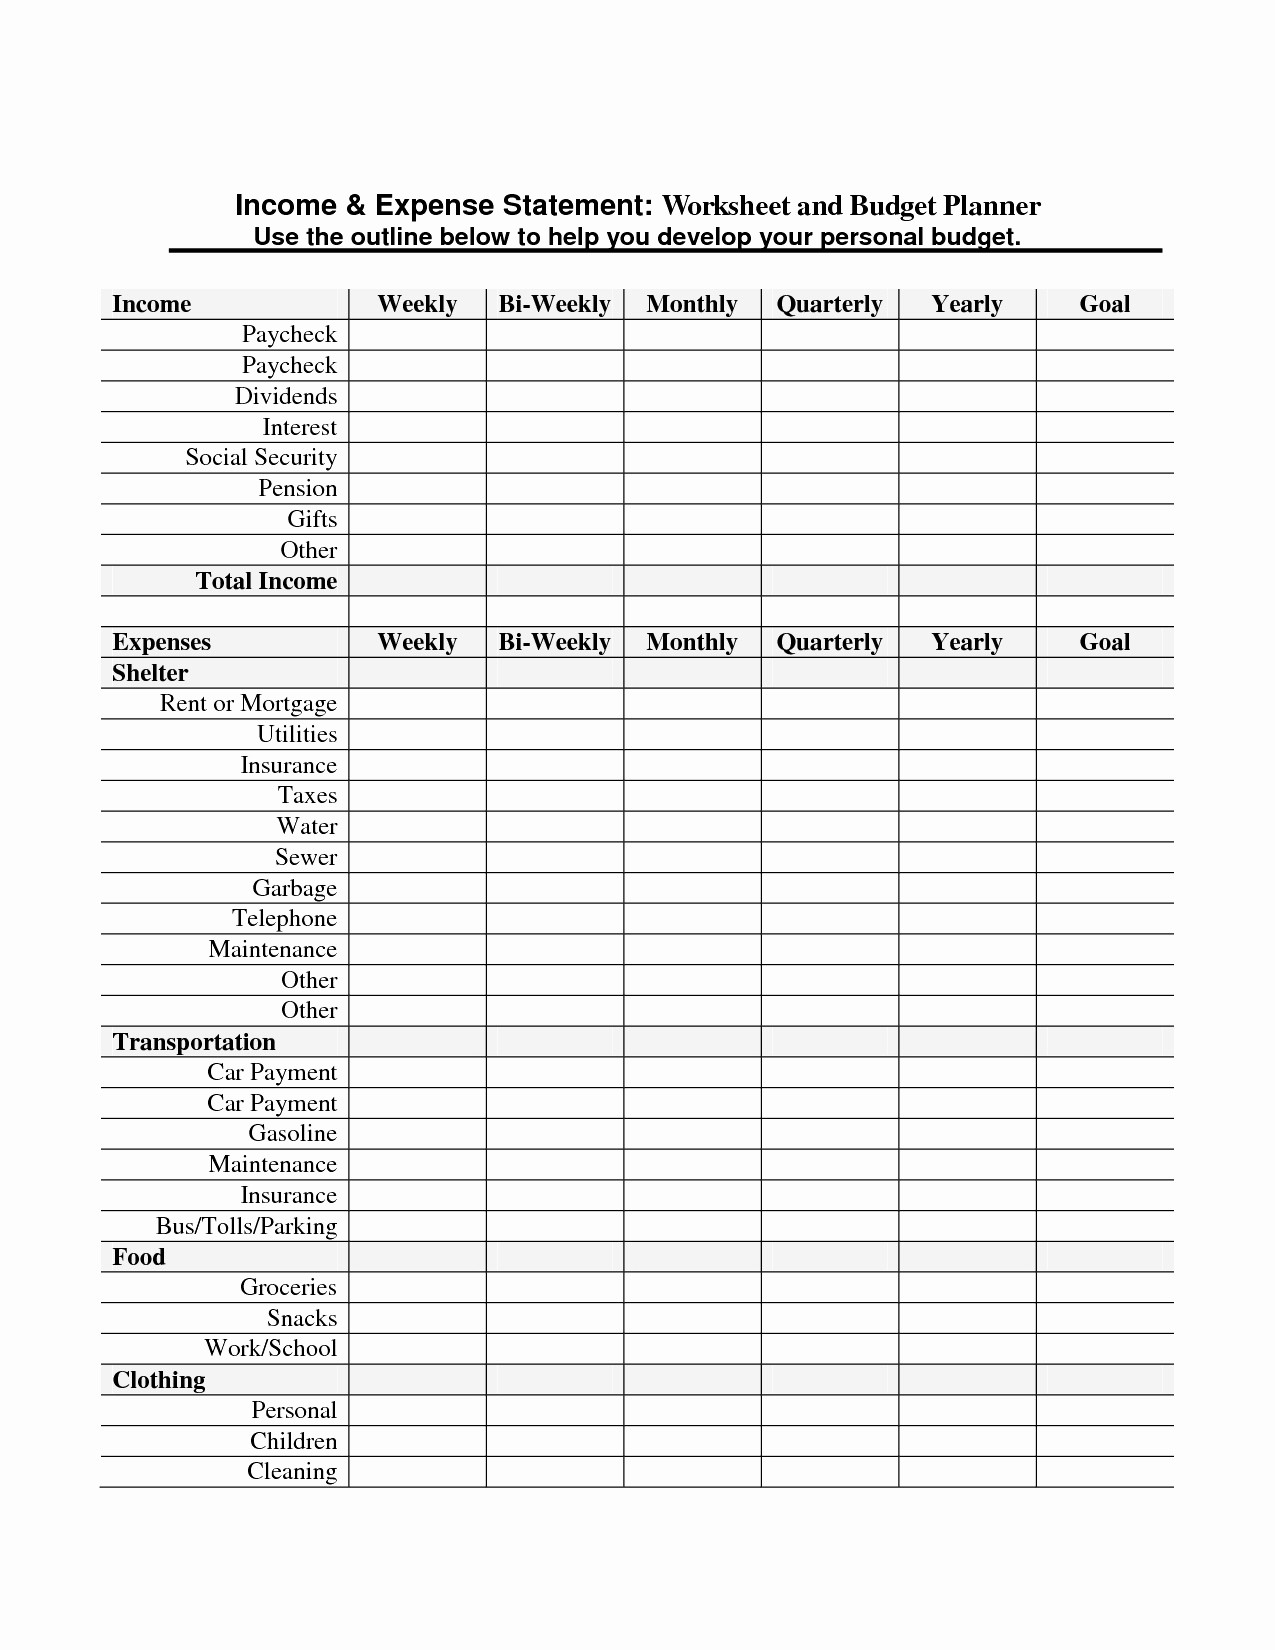 Schedule C Car And Truck Expenses Worksheet Awesome Driver Tax Document